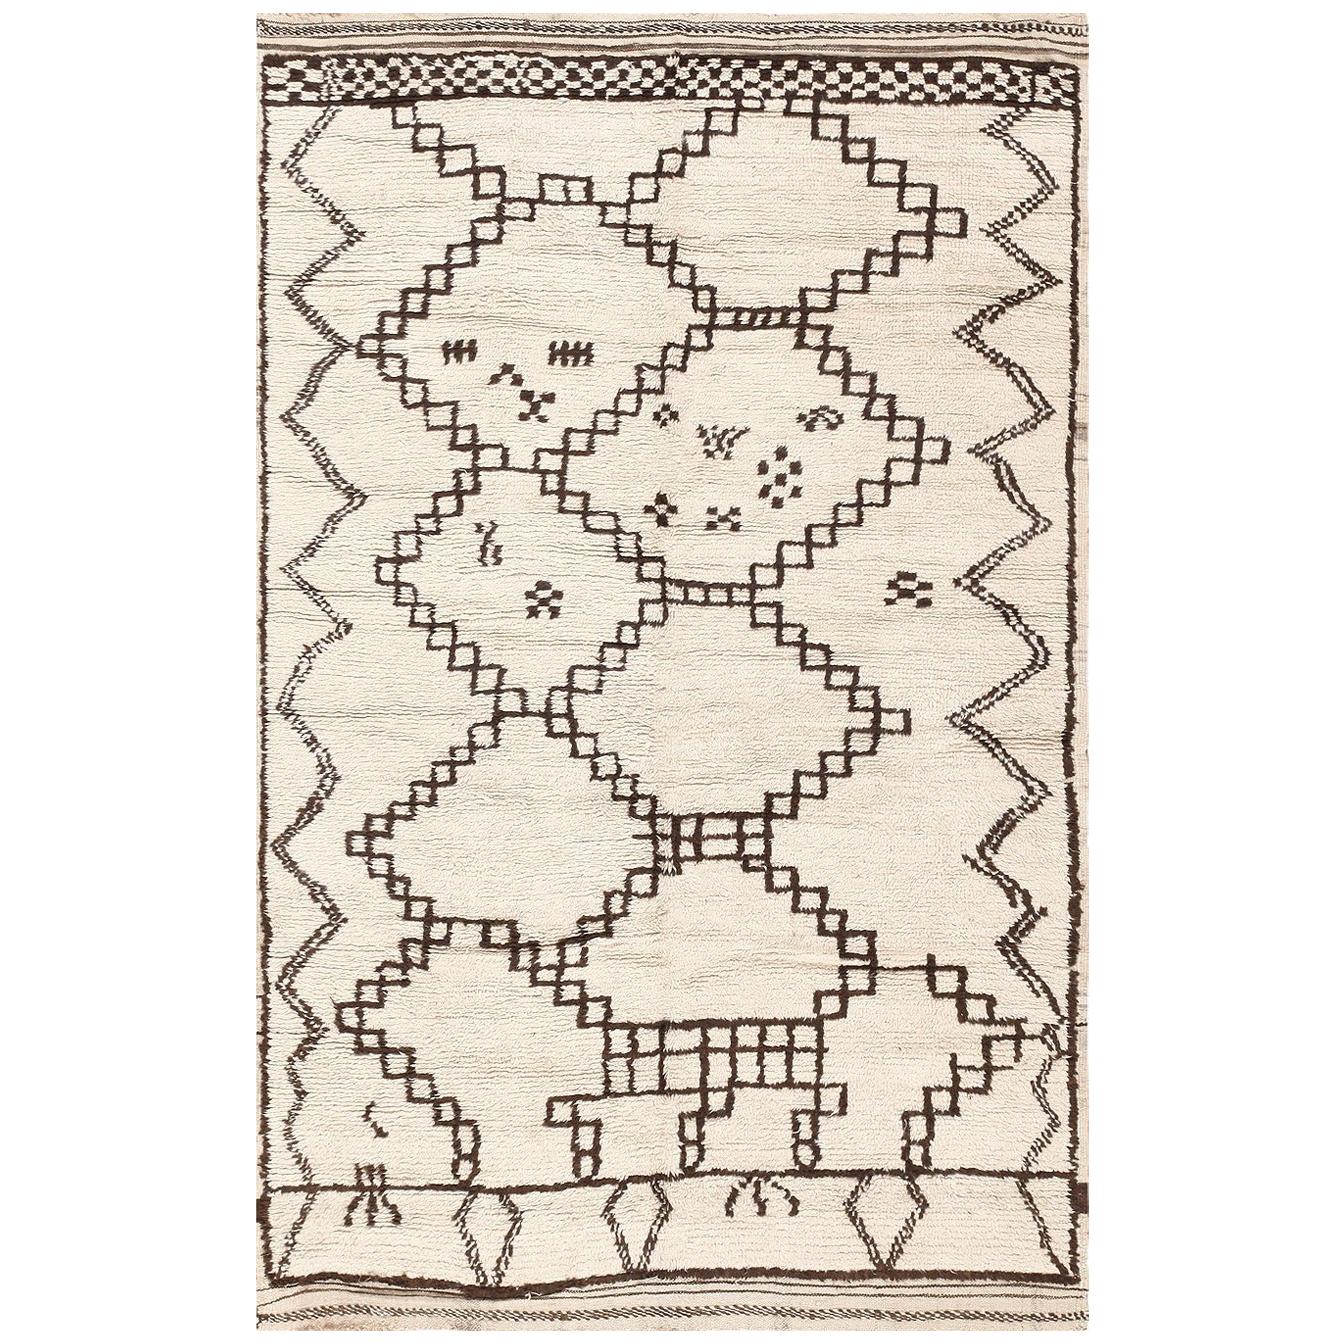 Nazmiyal Collection Moroccan Rug. Size: 4 ft 5 in x 7 ft (1.35 m x 2.13 m)